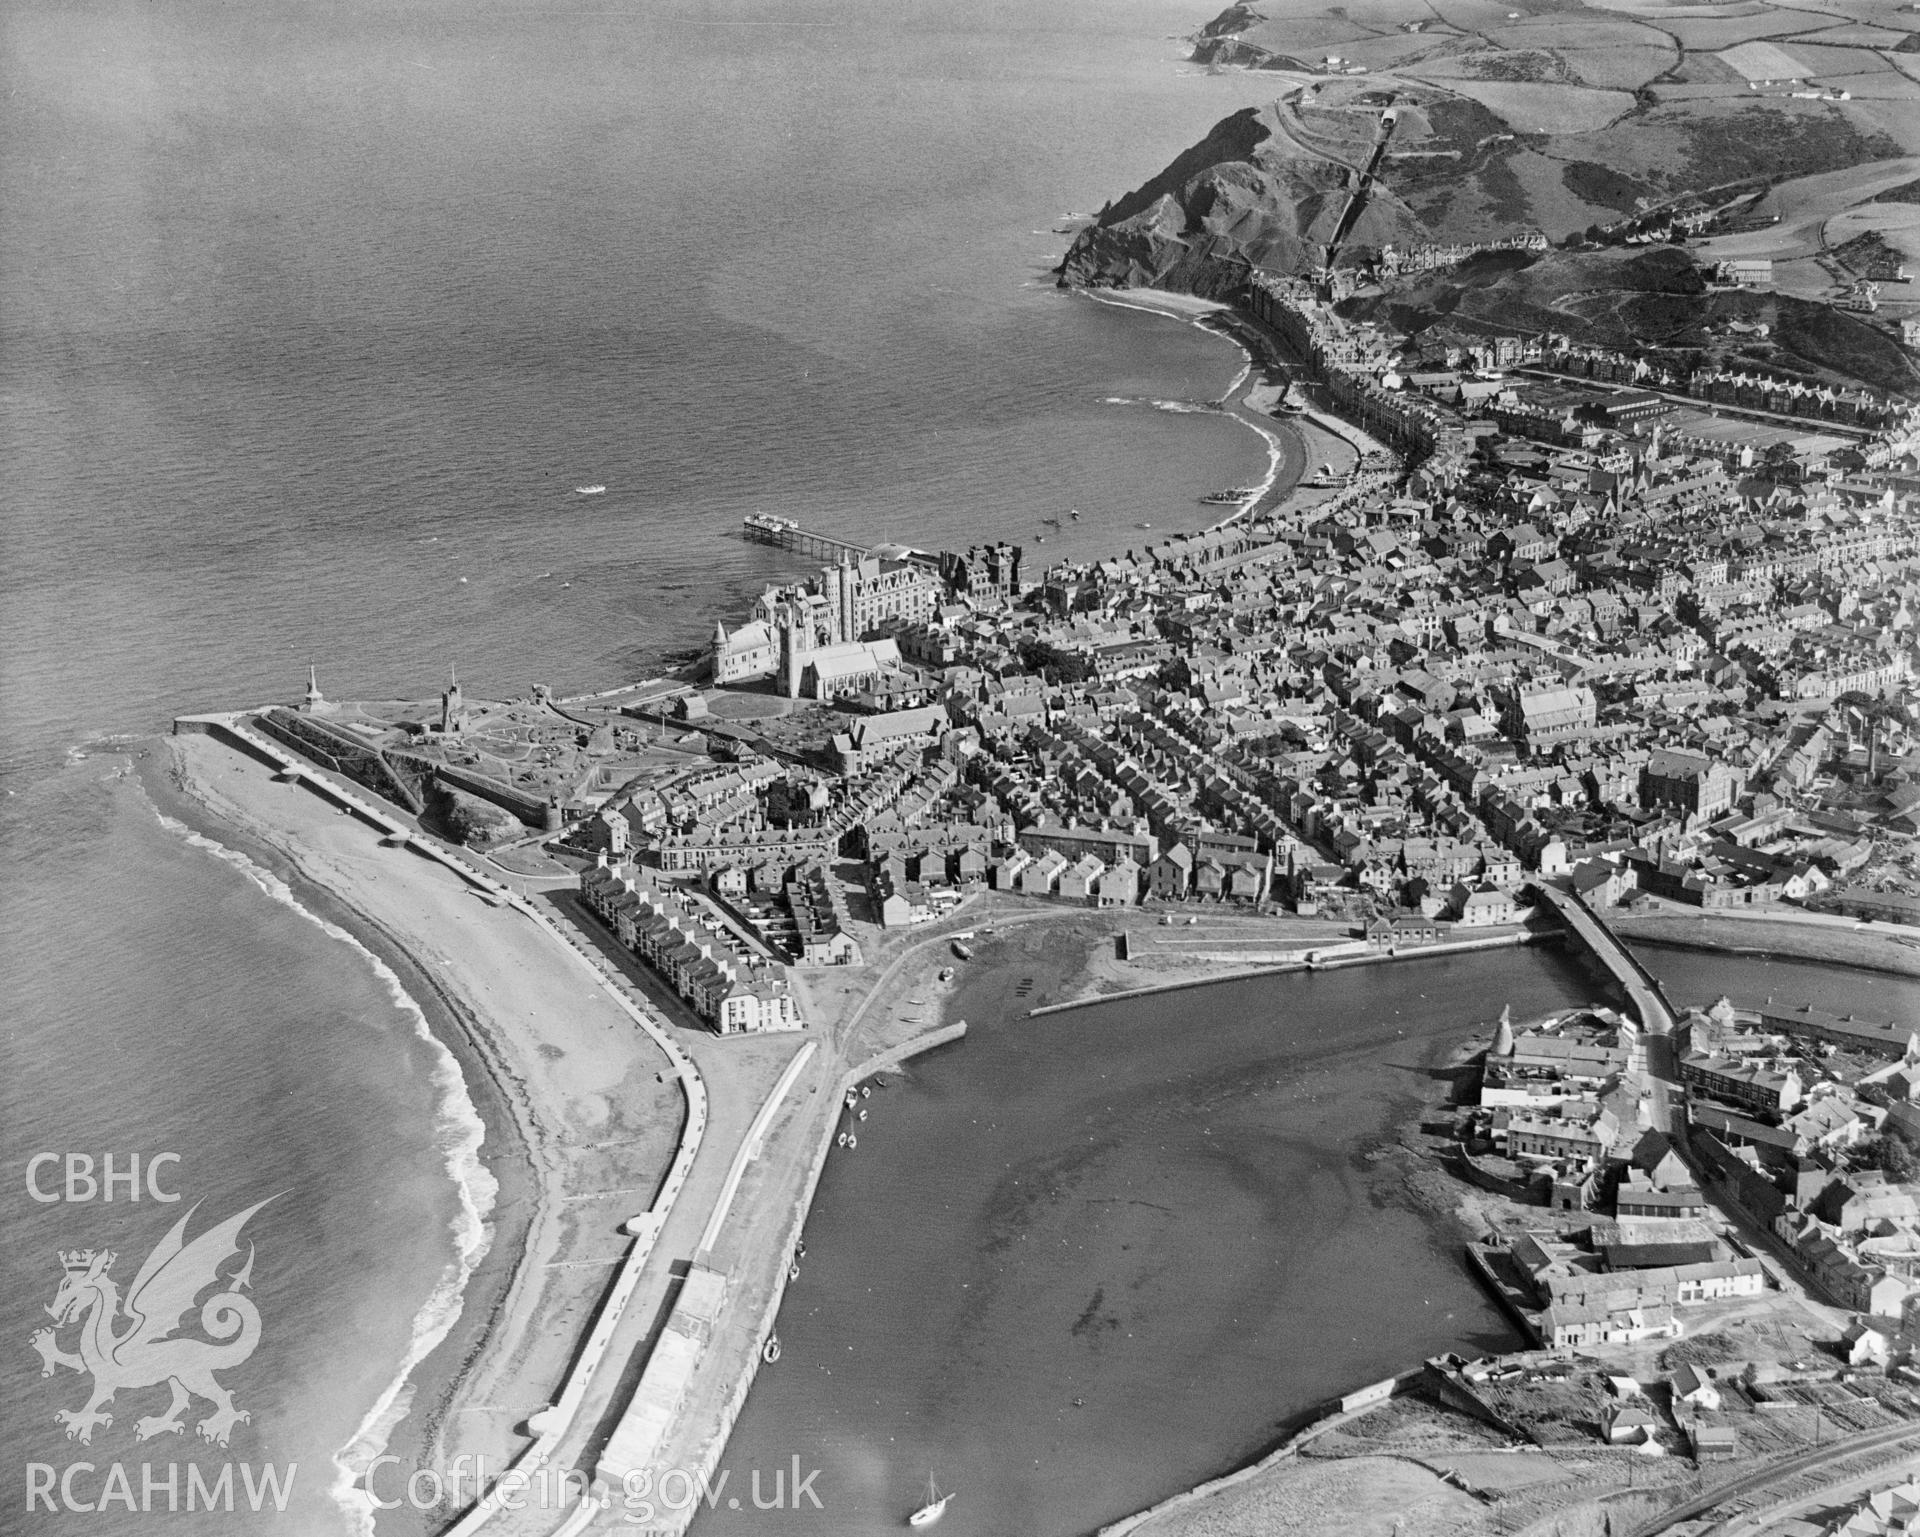 General view of Aberystwyth showing harbour, oblique aerial view. 5?x4? black and white glass plate negative.